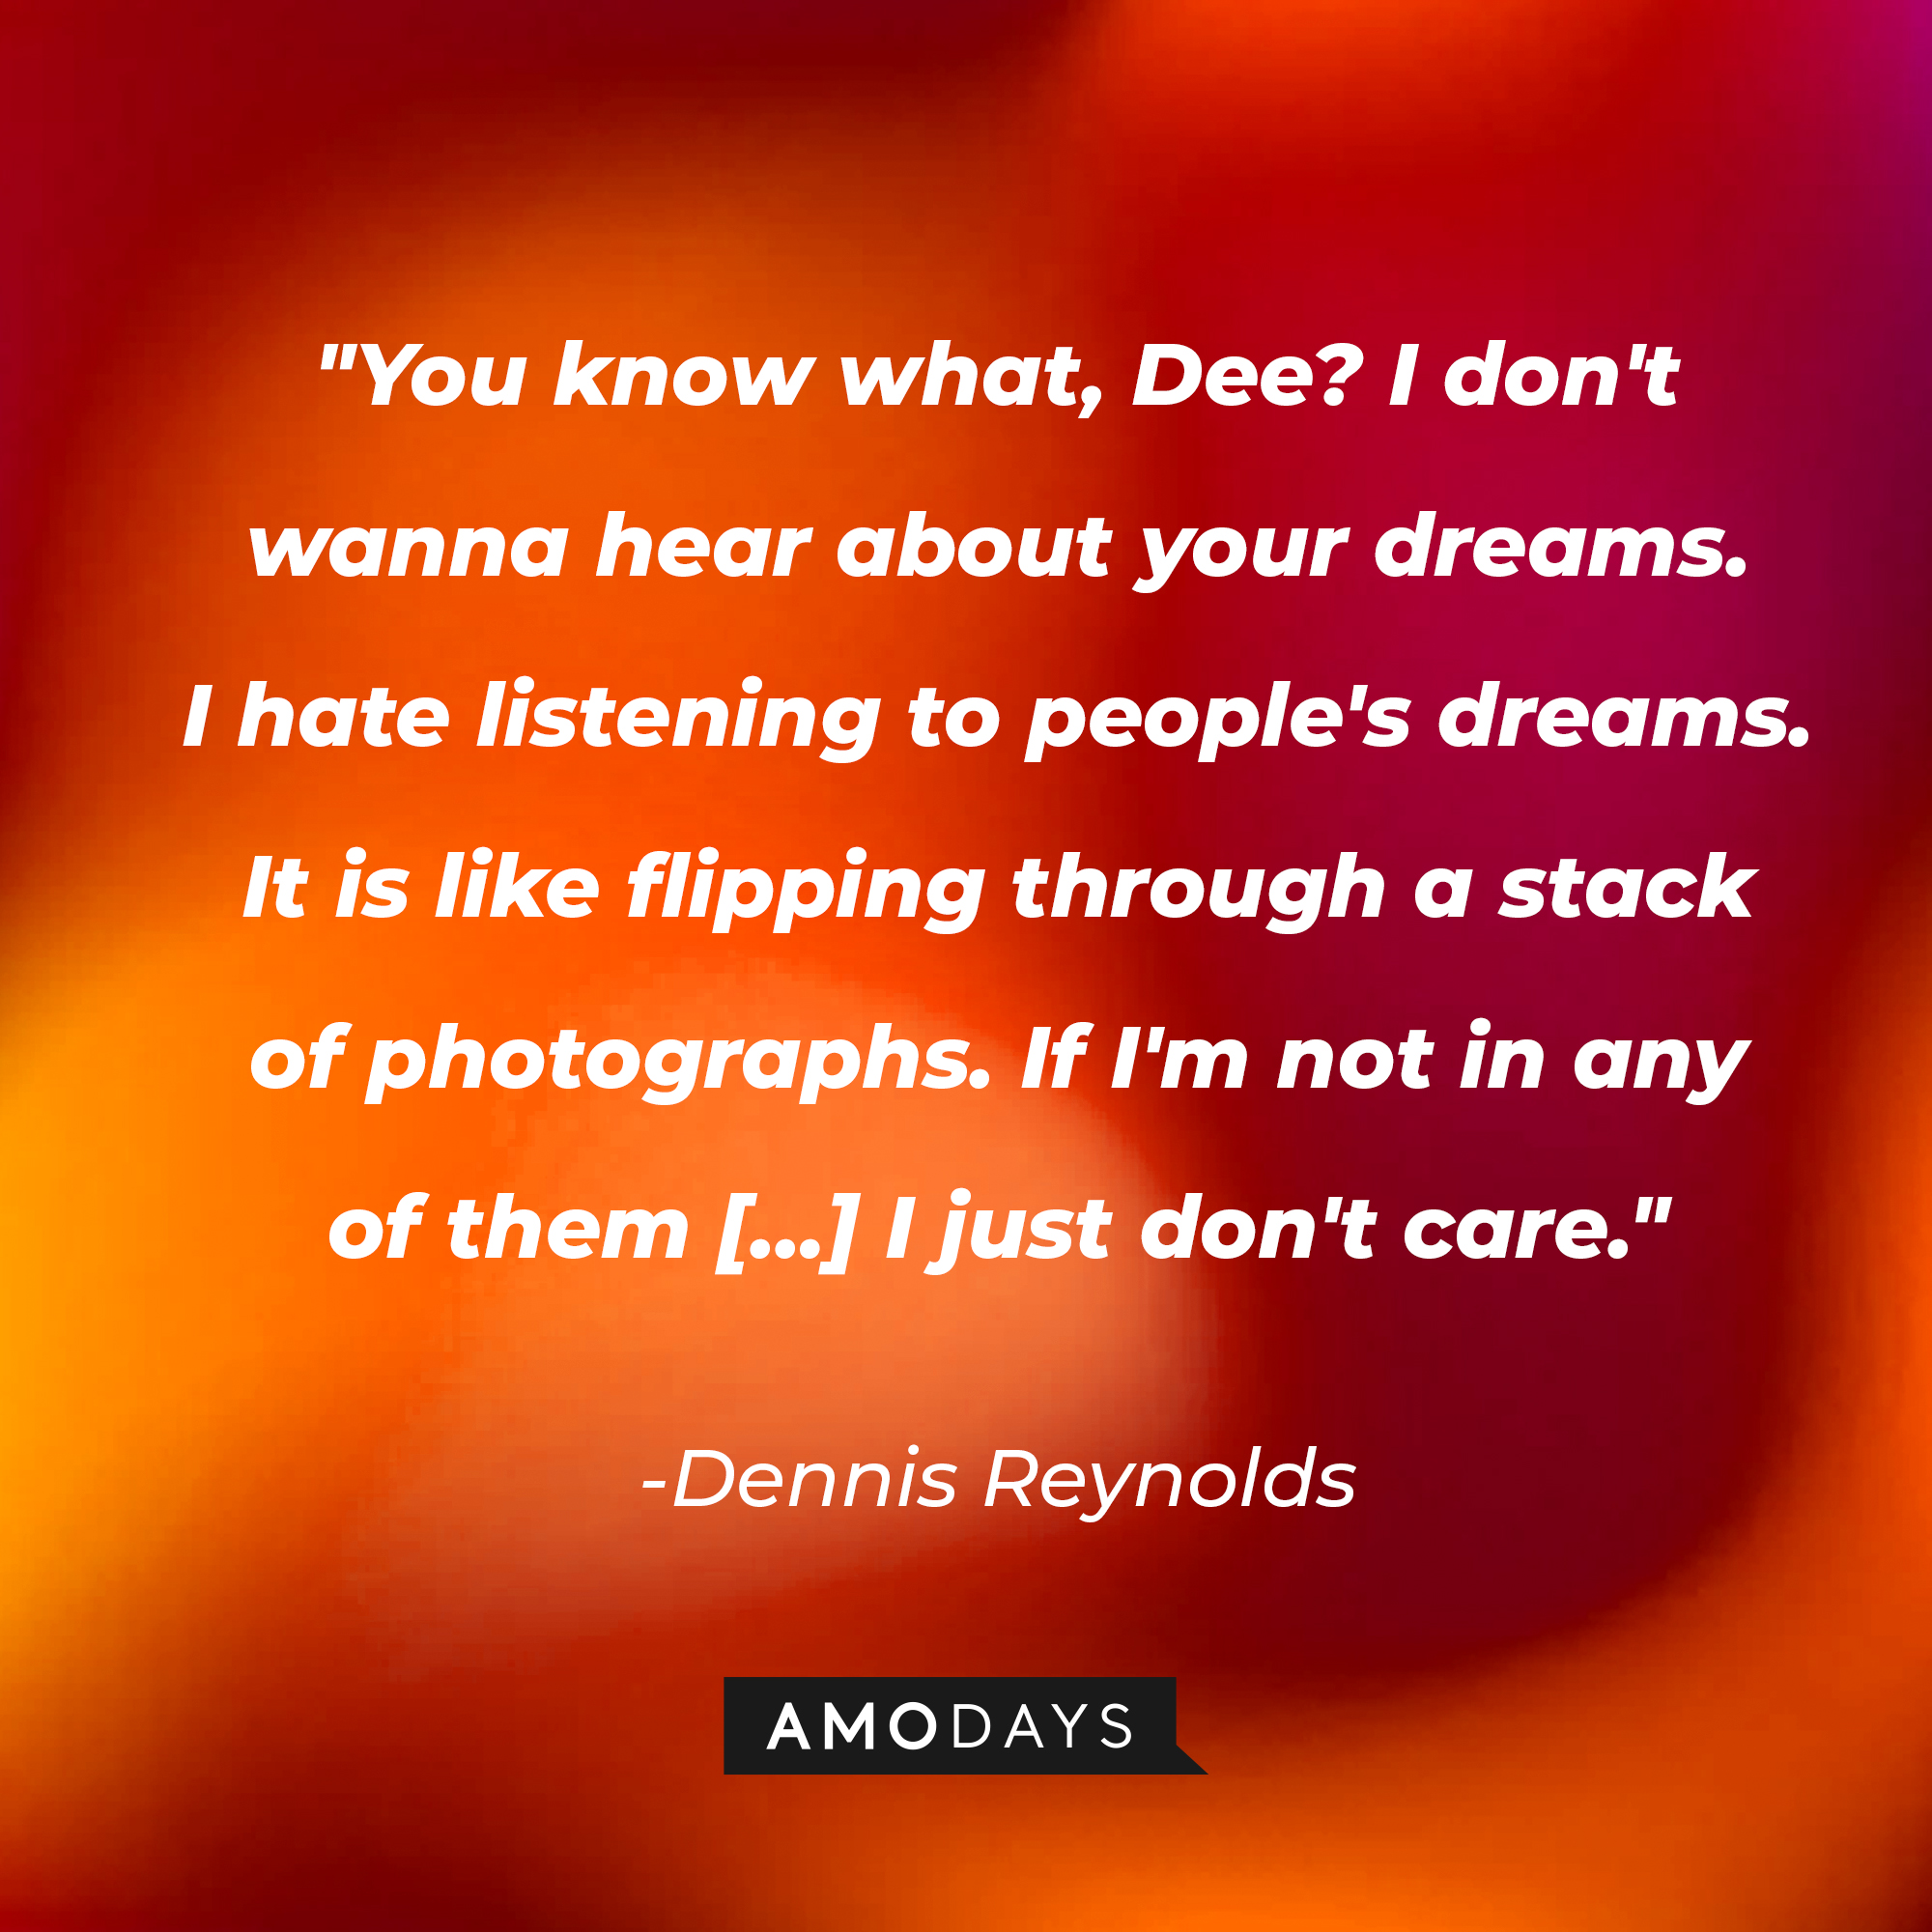 Dennis Reynolds’ quote:  “You know what, Dee? I don't wanna hear about your dreams. I hate listening to people's dreams. It is like flipping through a stack of photographs. If I'm not in any of them […] I just don't care.” | Source: AmoDays